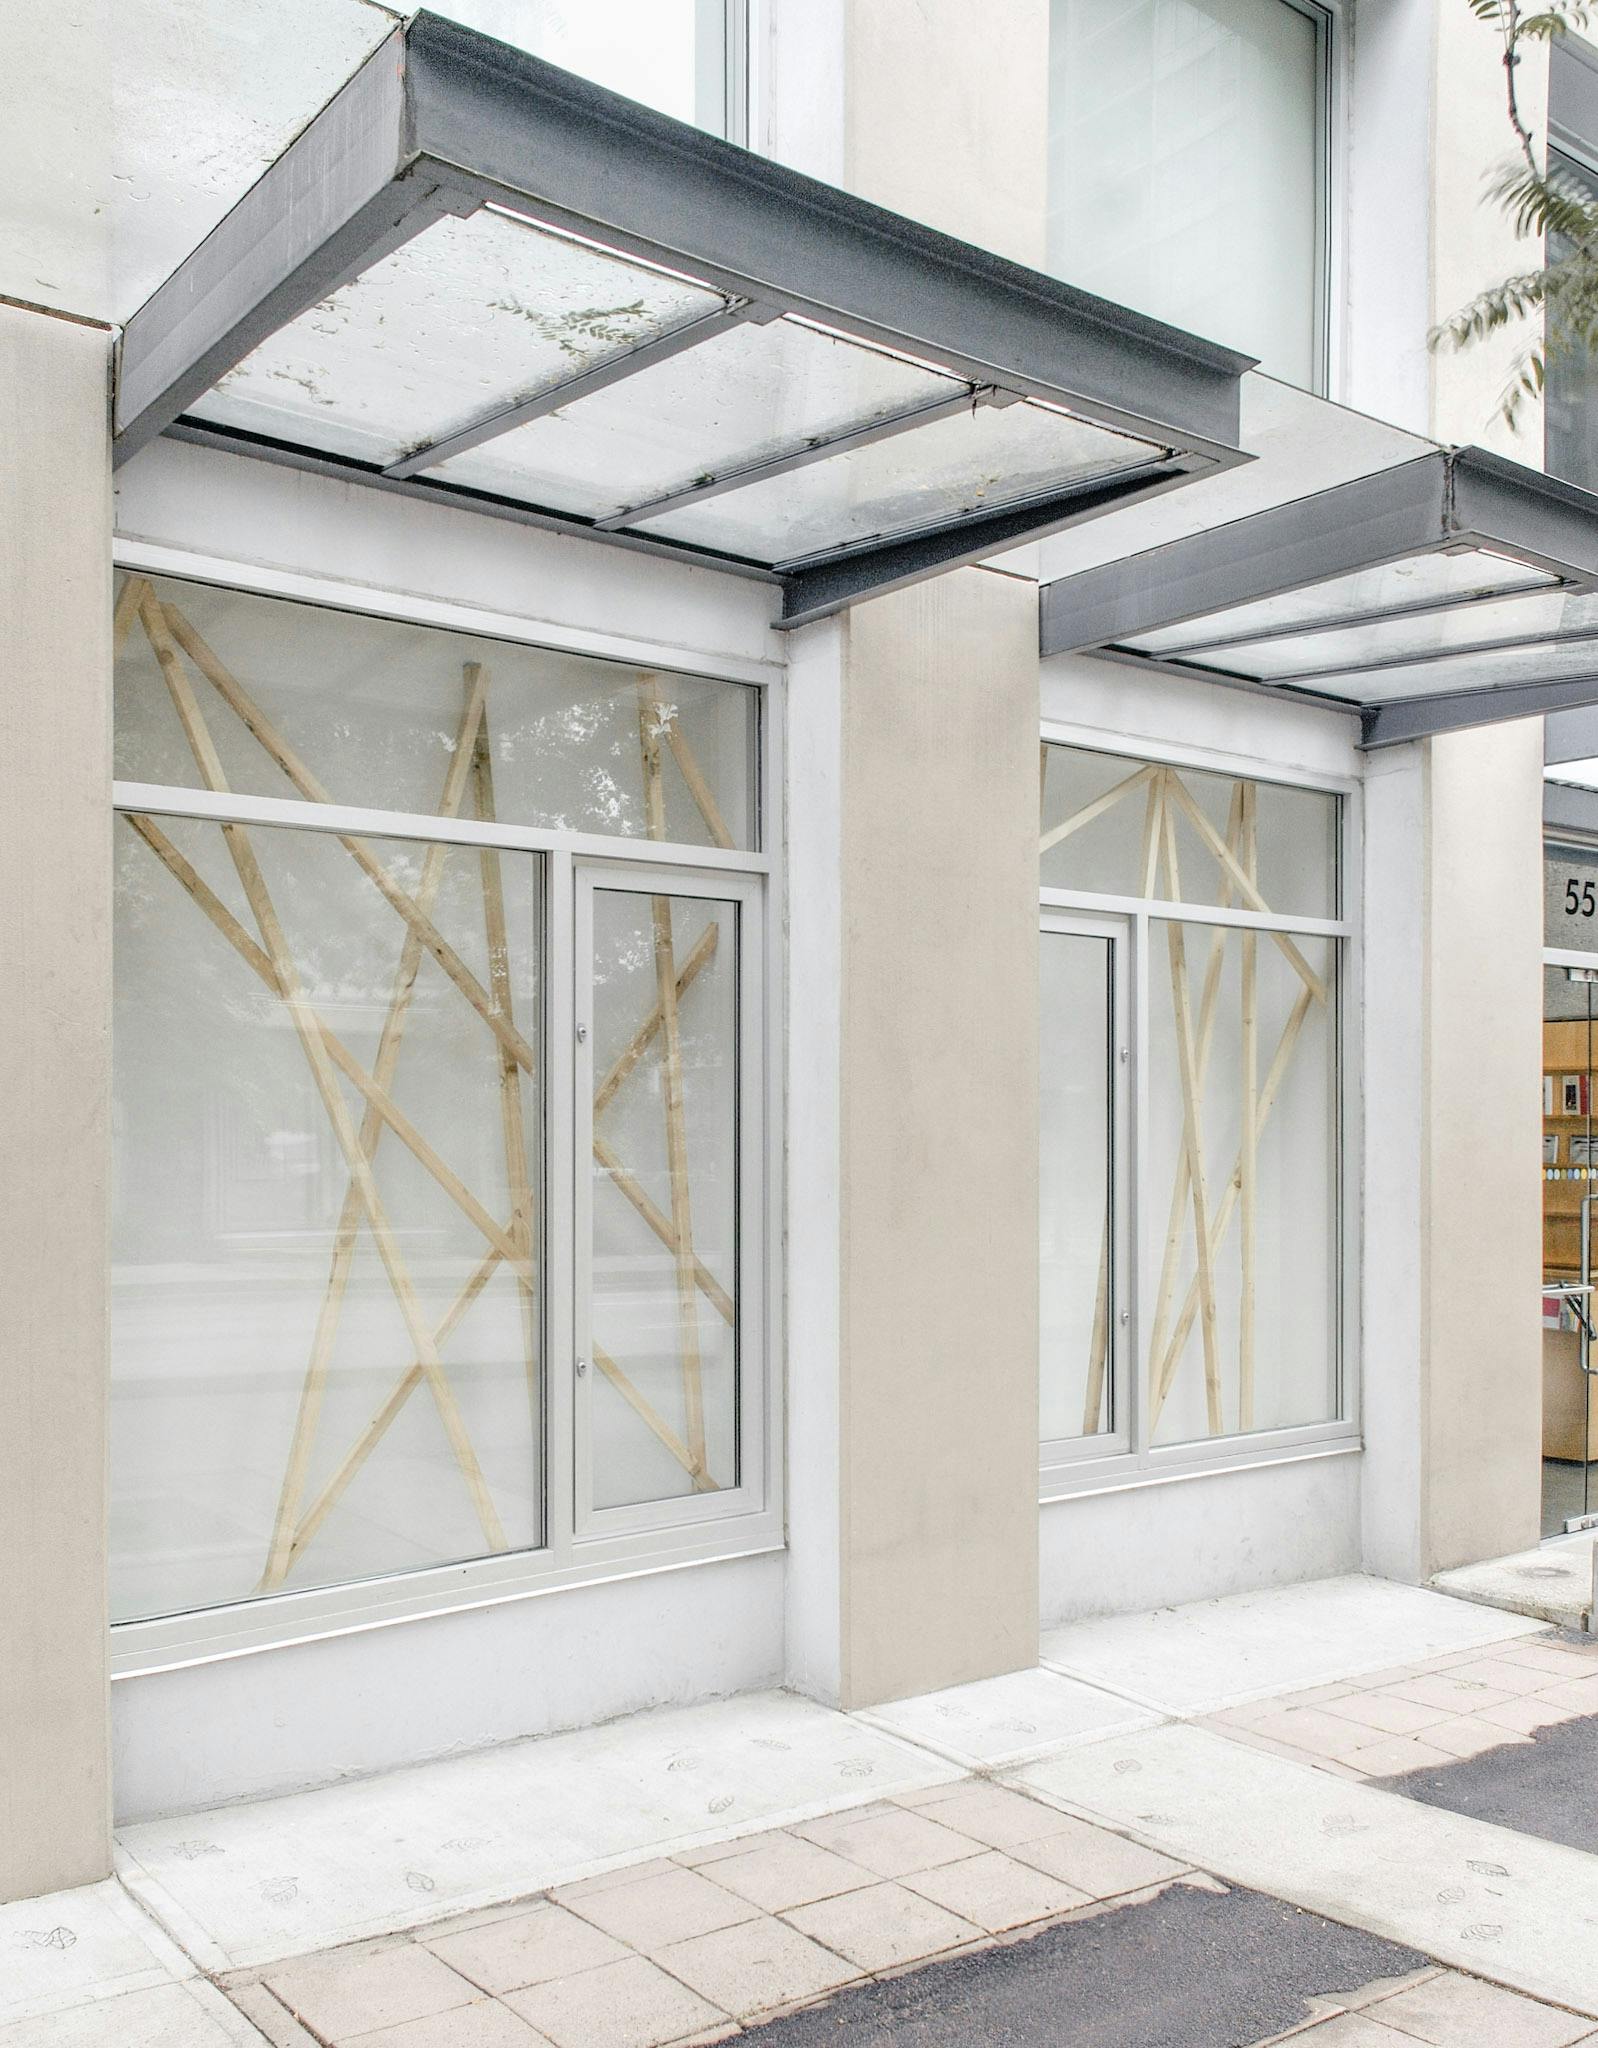 This image shows two of CAG’s window spaces, in which Elspeth Pratt’s installation art is displayed. About ten wooden bars are diagonally placed in each window. No bars parallel to the others. 